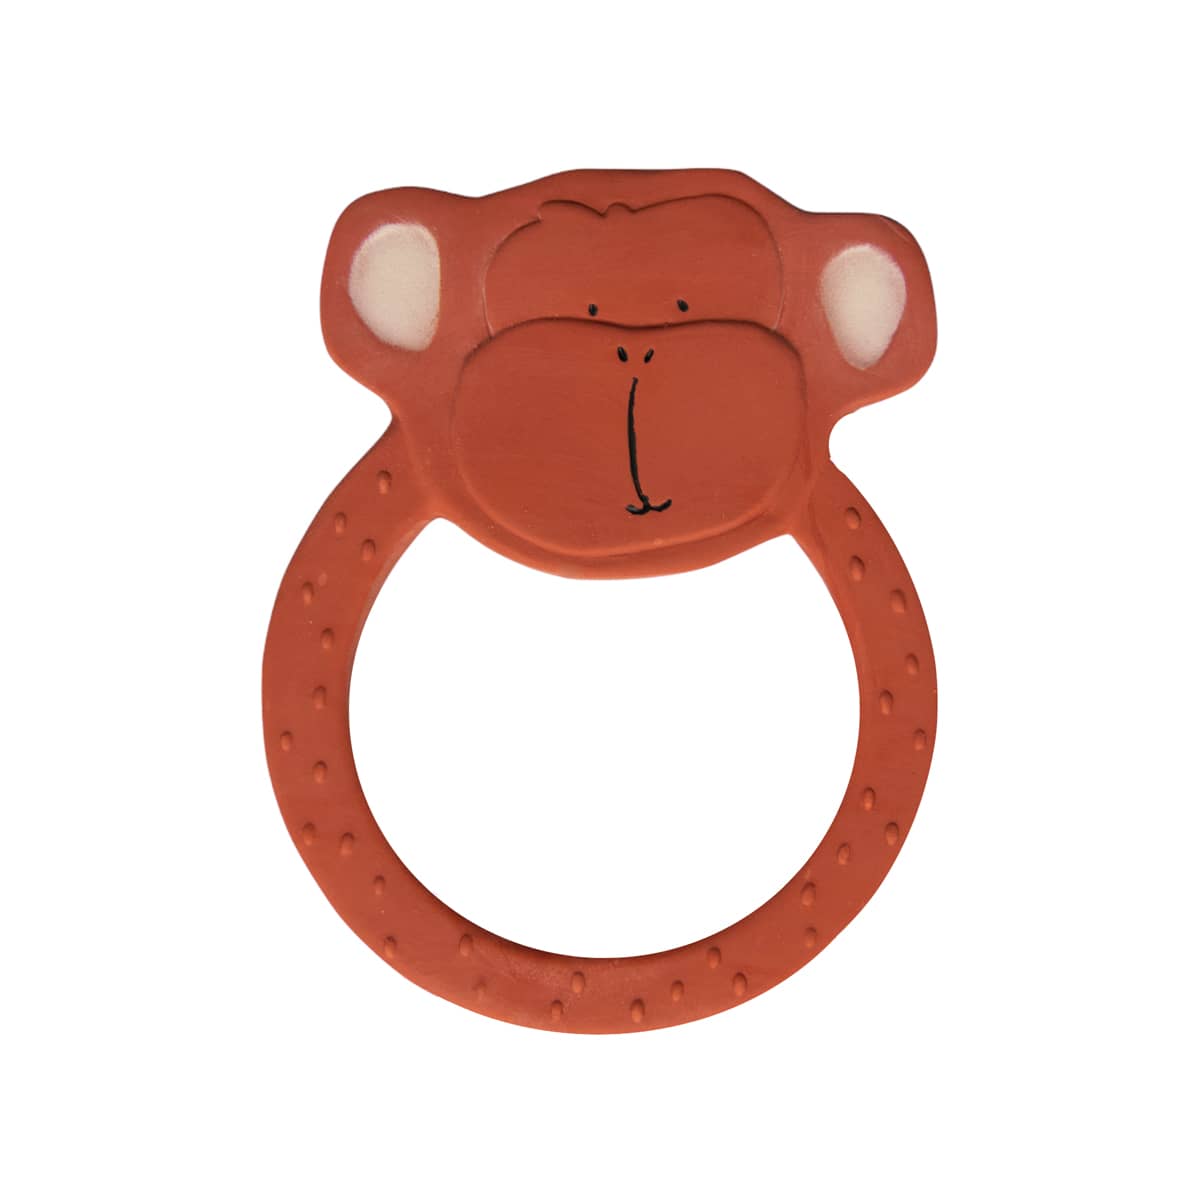 Trixie Natural Rubber Round Teether - Mr. Monkey